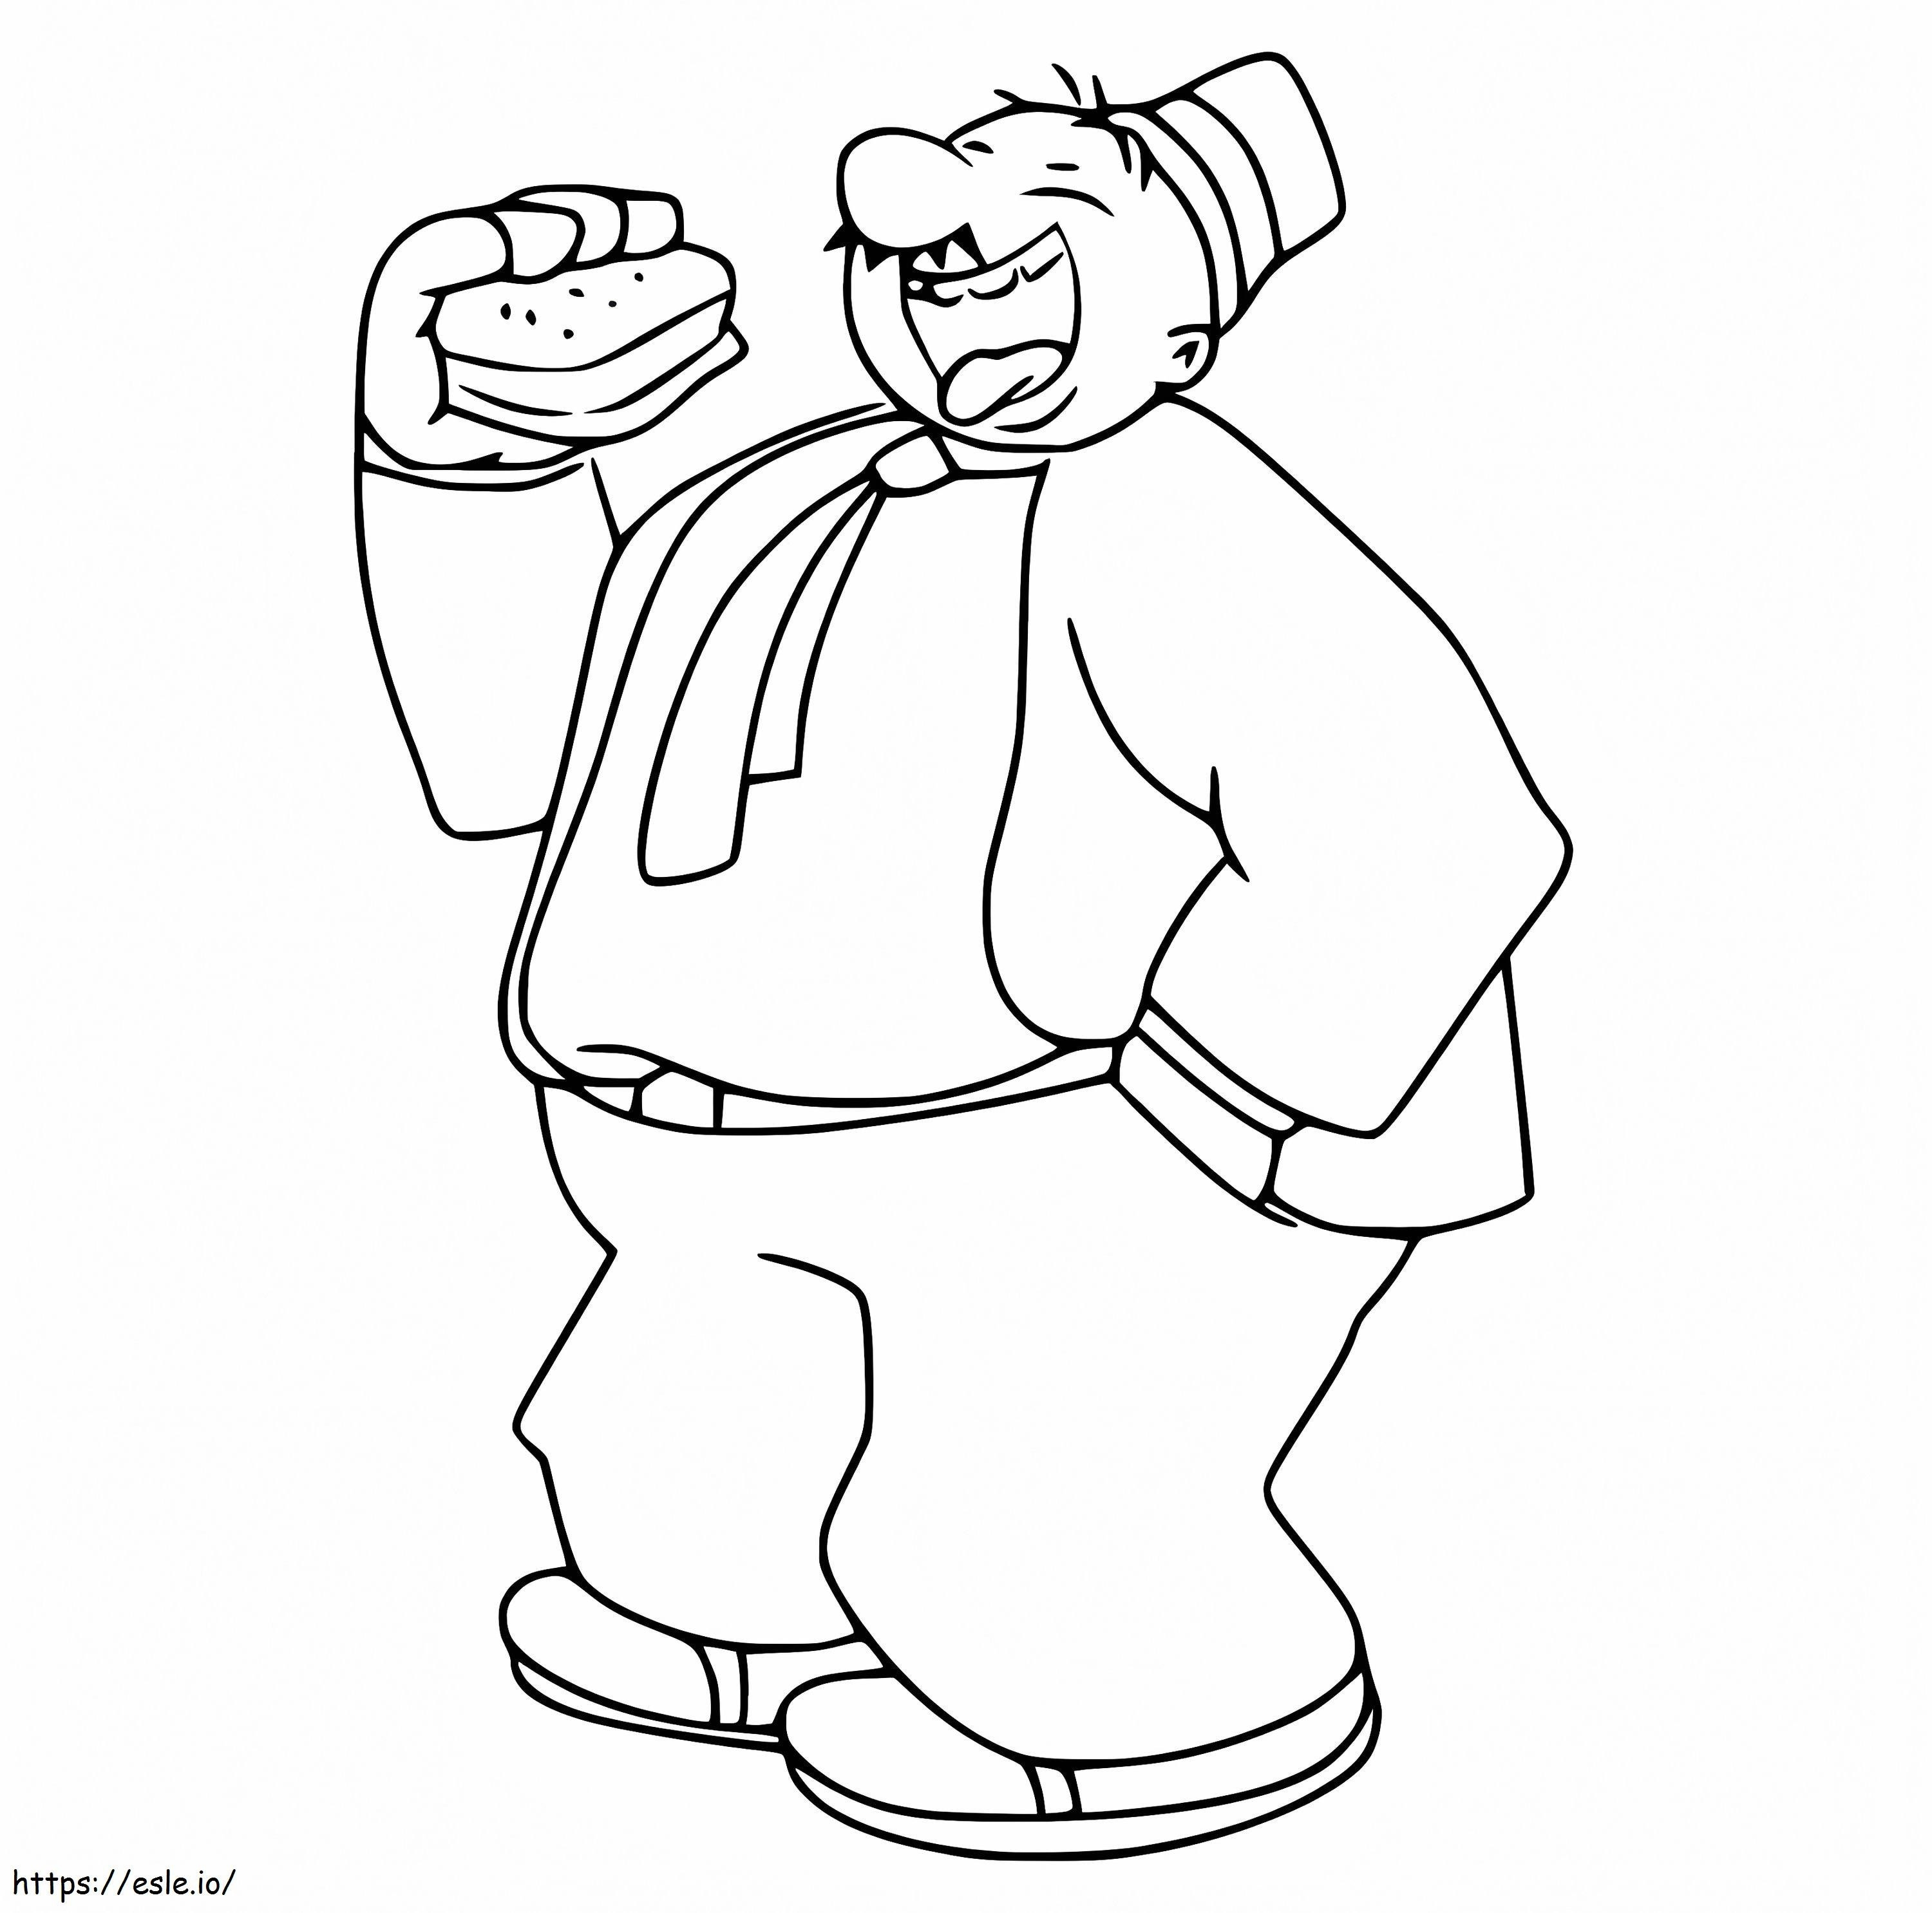 J Wellington Wimpy From Popeye coloring page